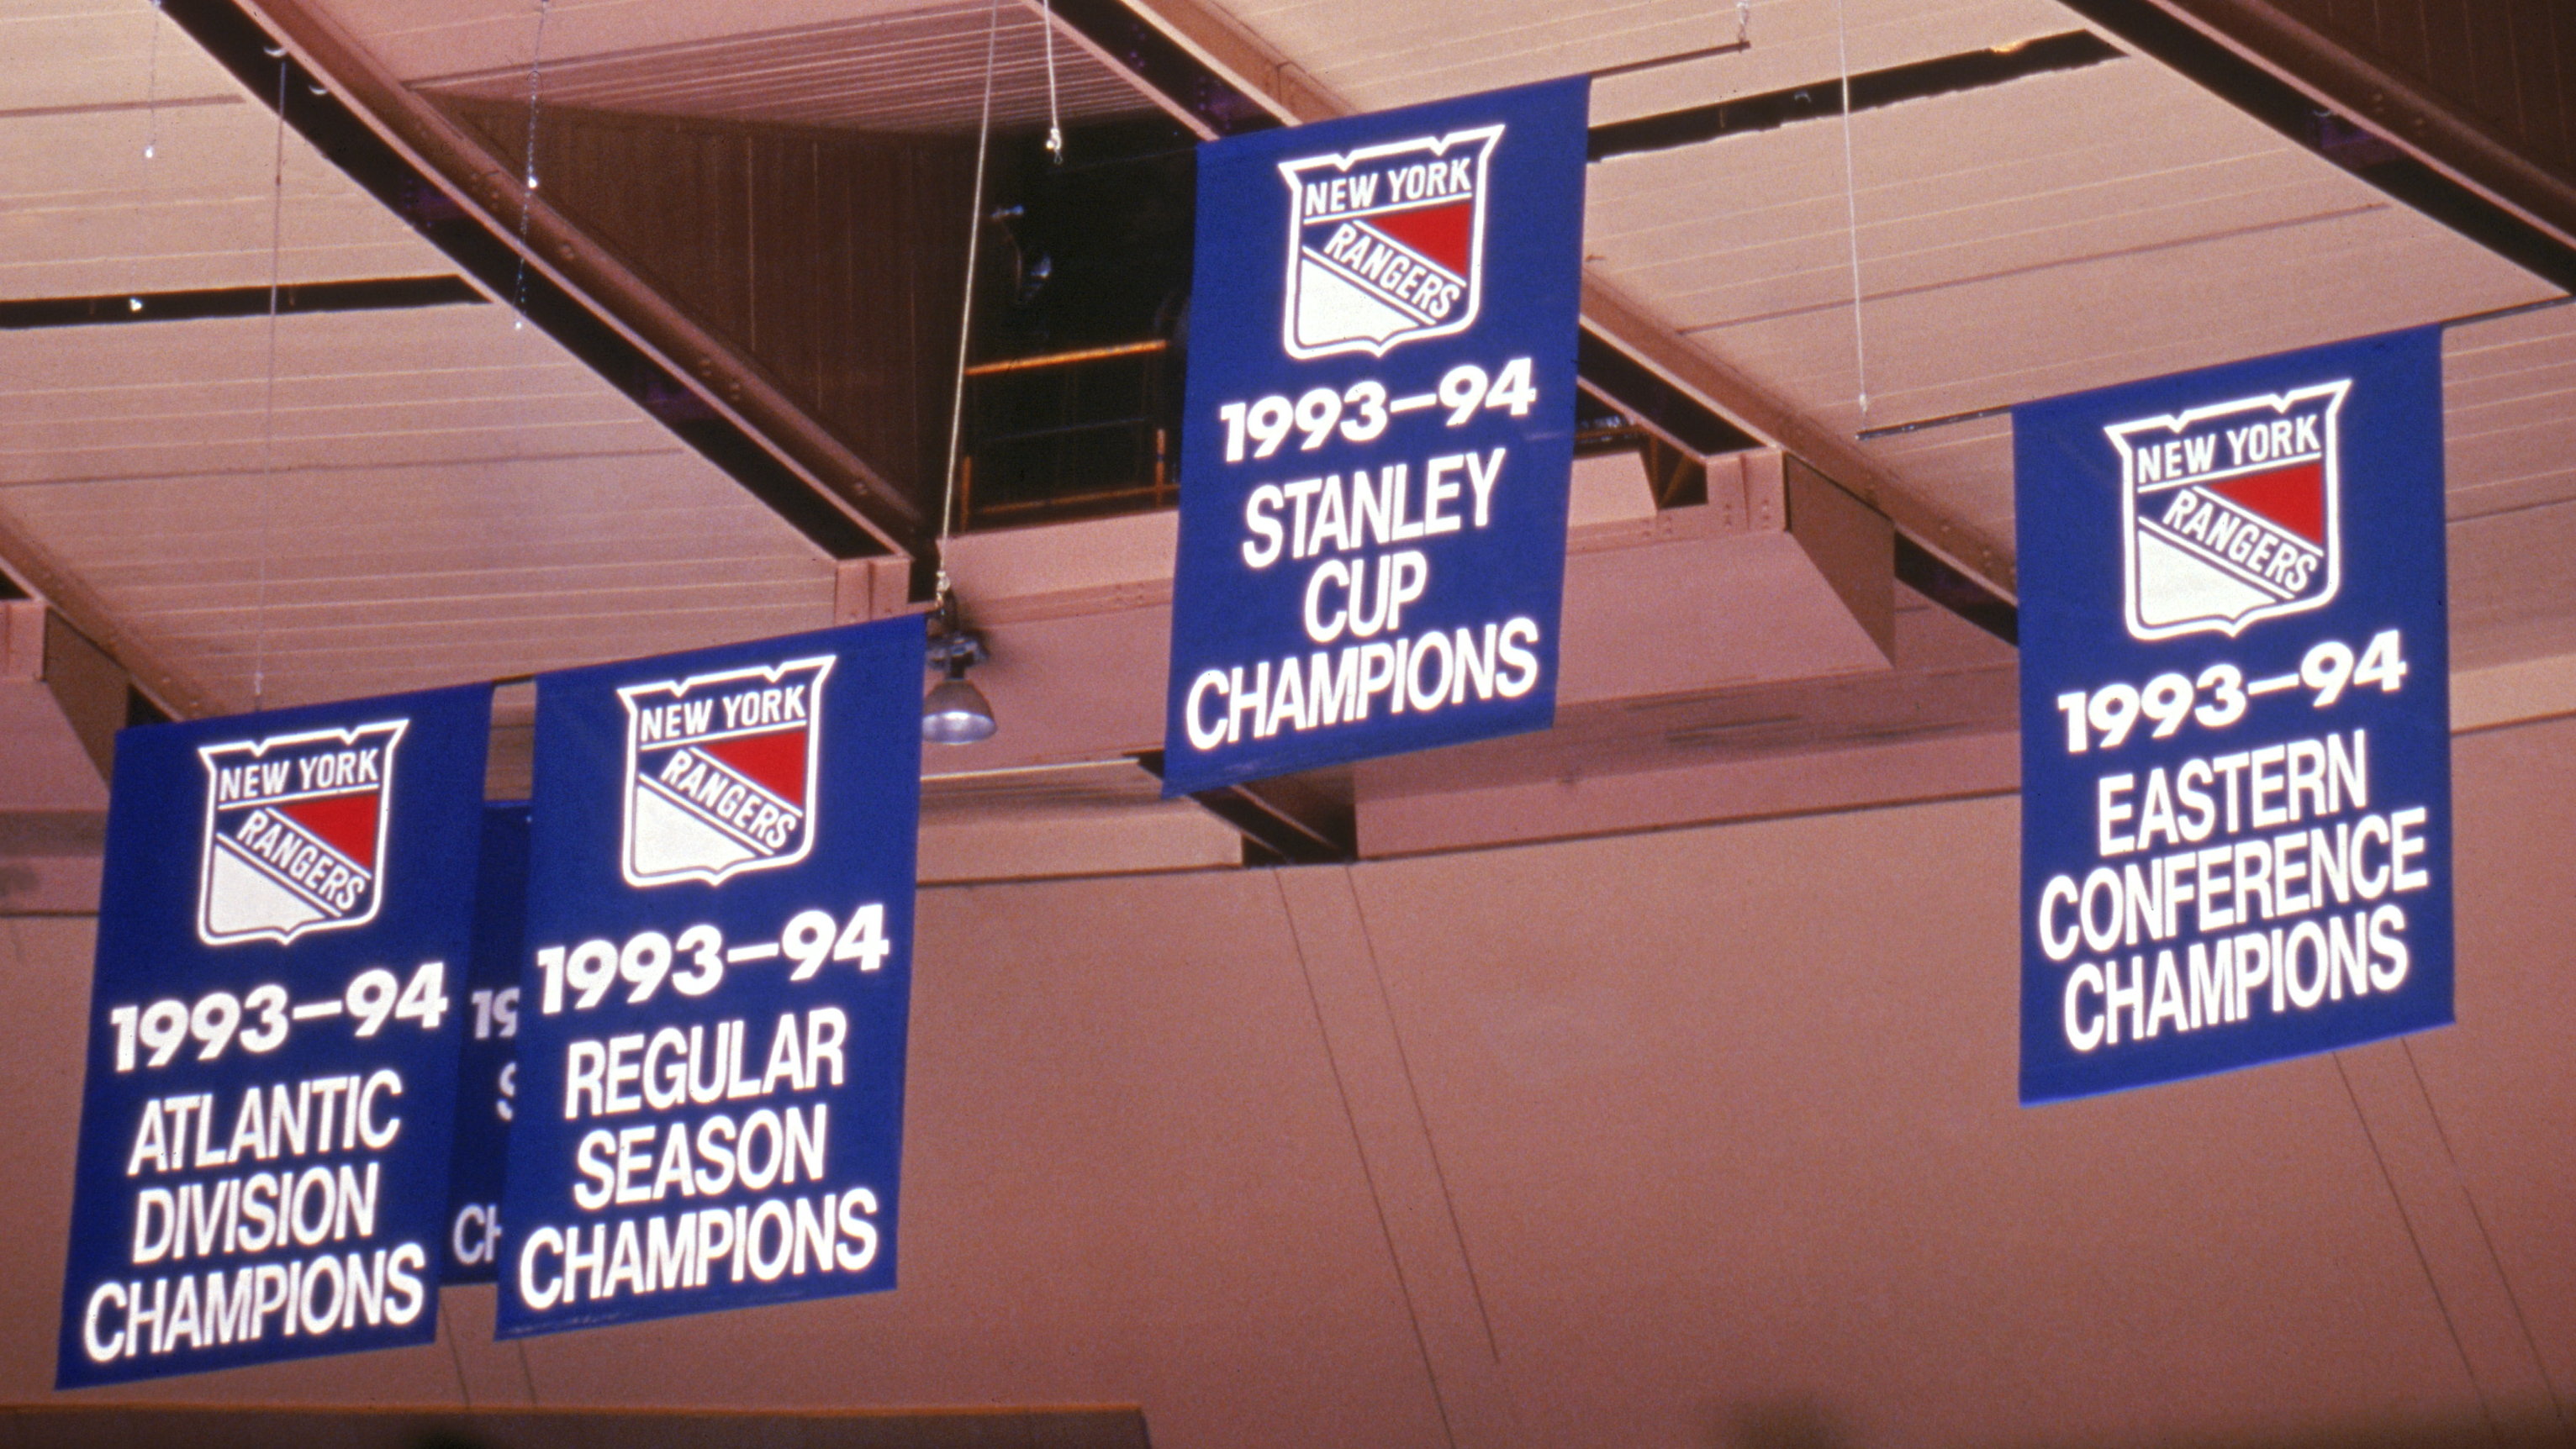 New York Rangers: 1994 Stanley Cup Champions